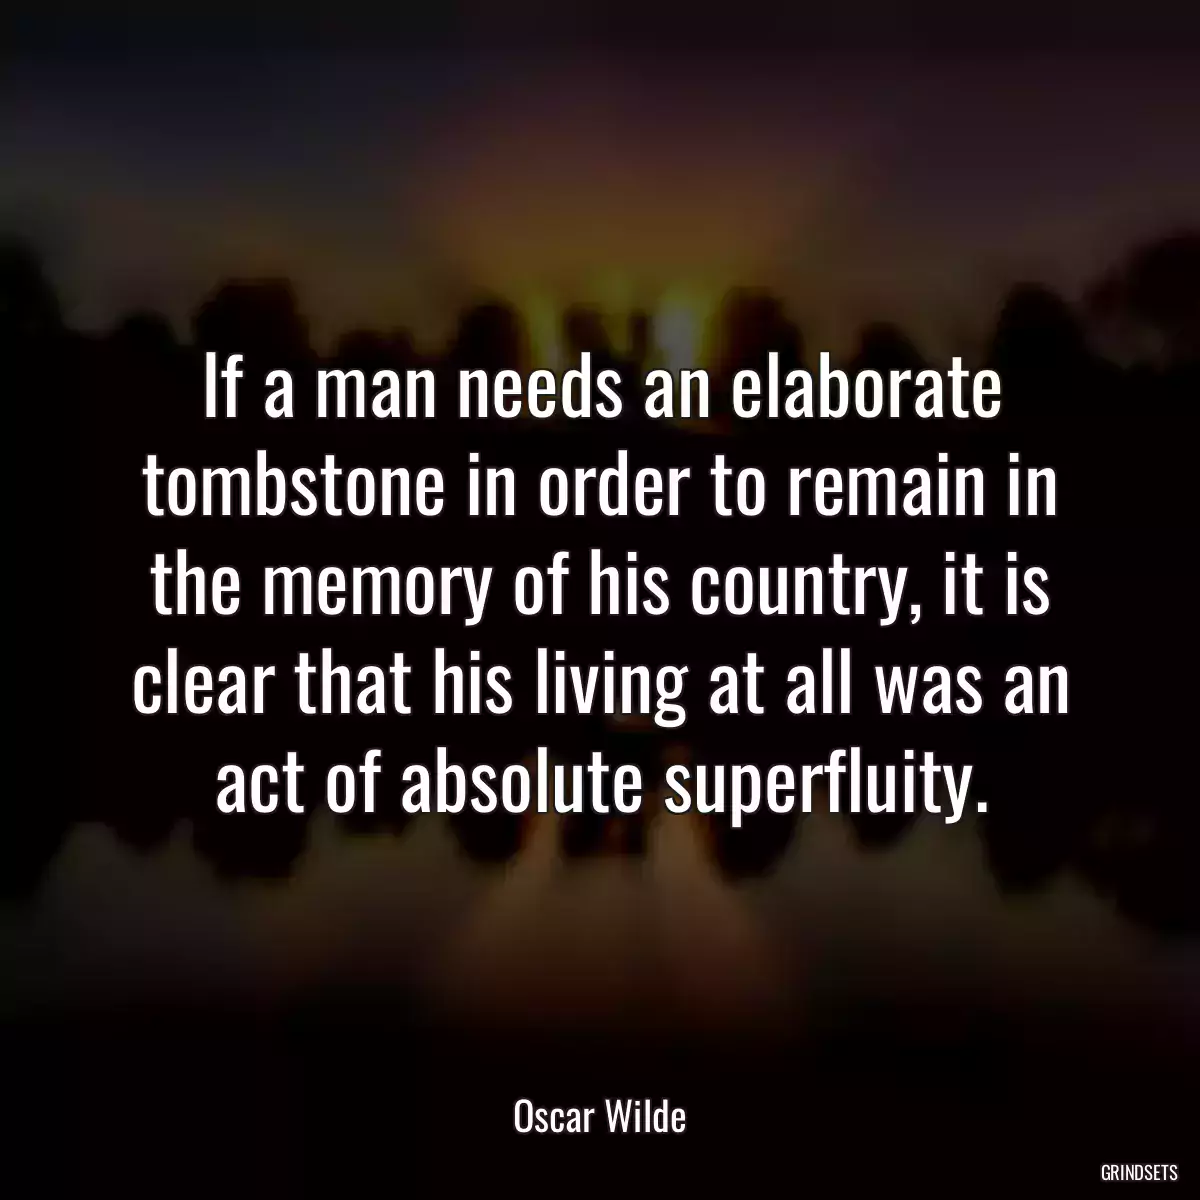 If a man needs an elaborate tombstone in order to remain in the memory of his country, it is clear that his living at all was an act of absolute superfluity.